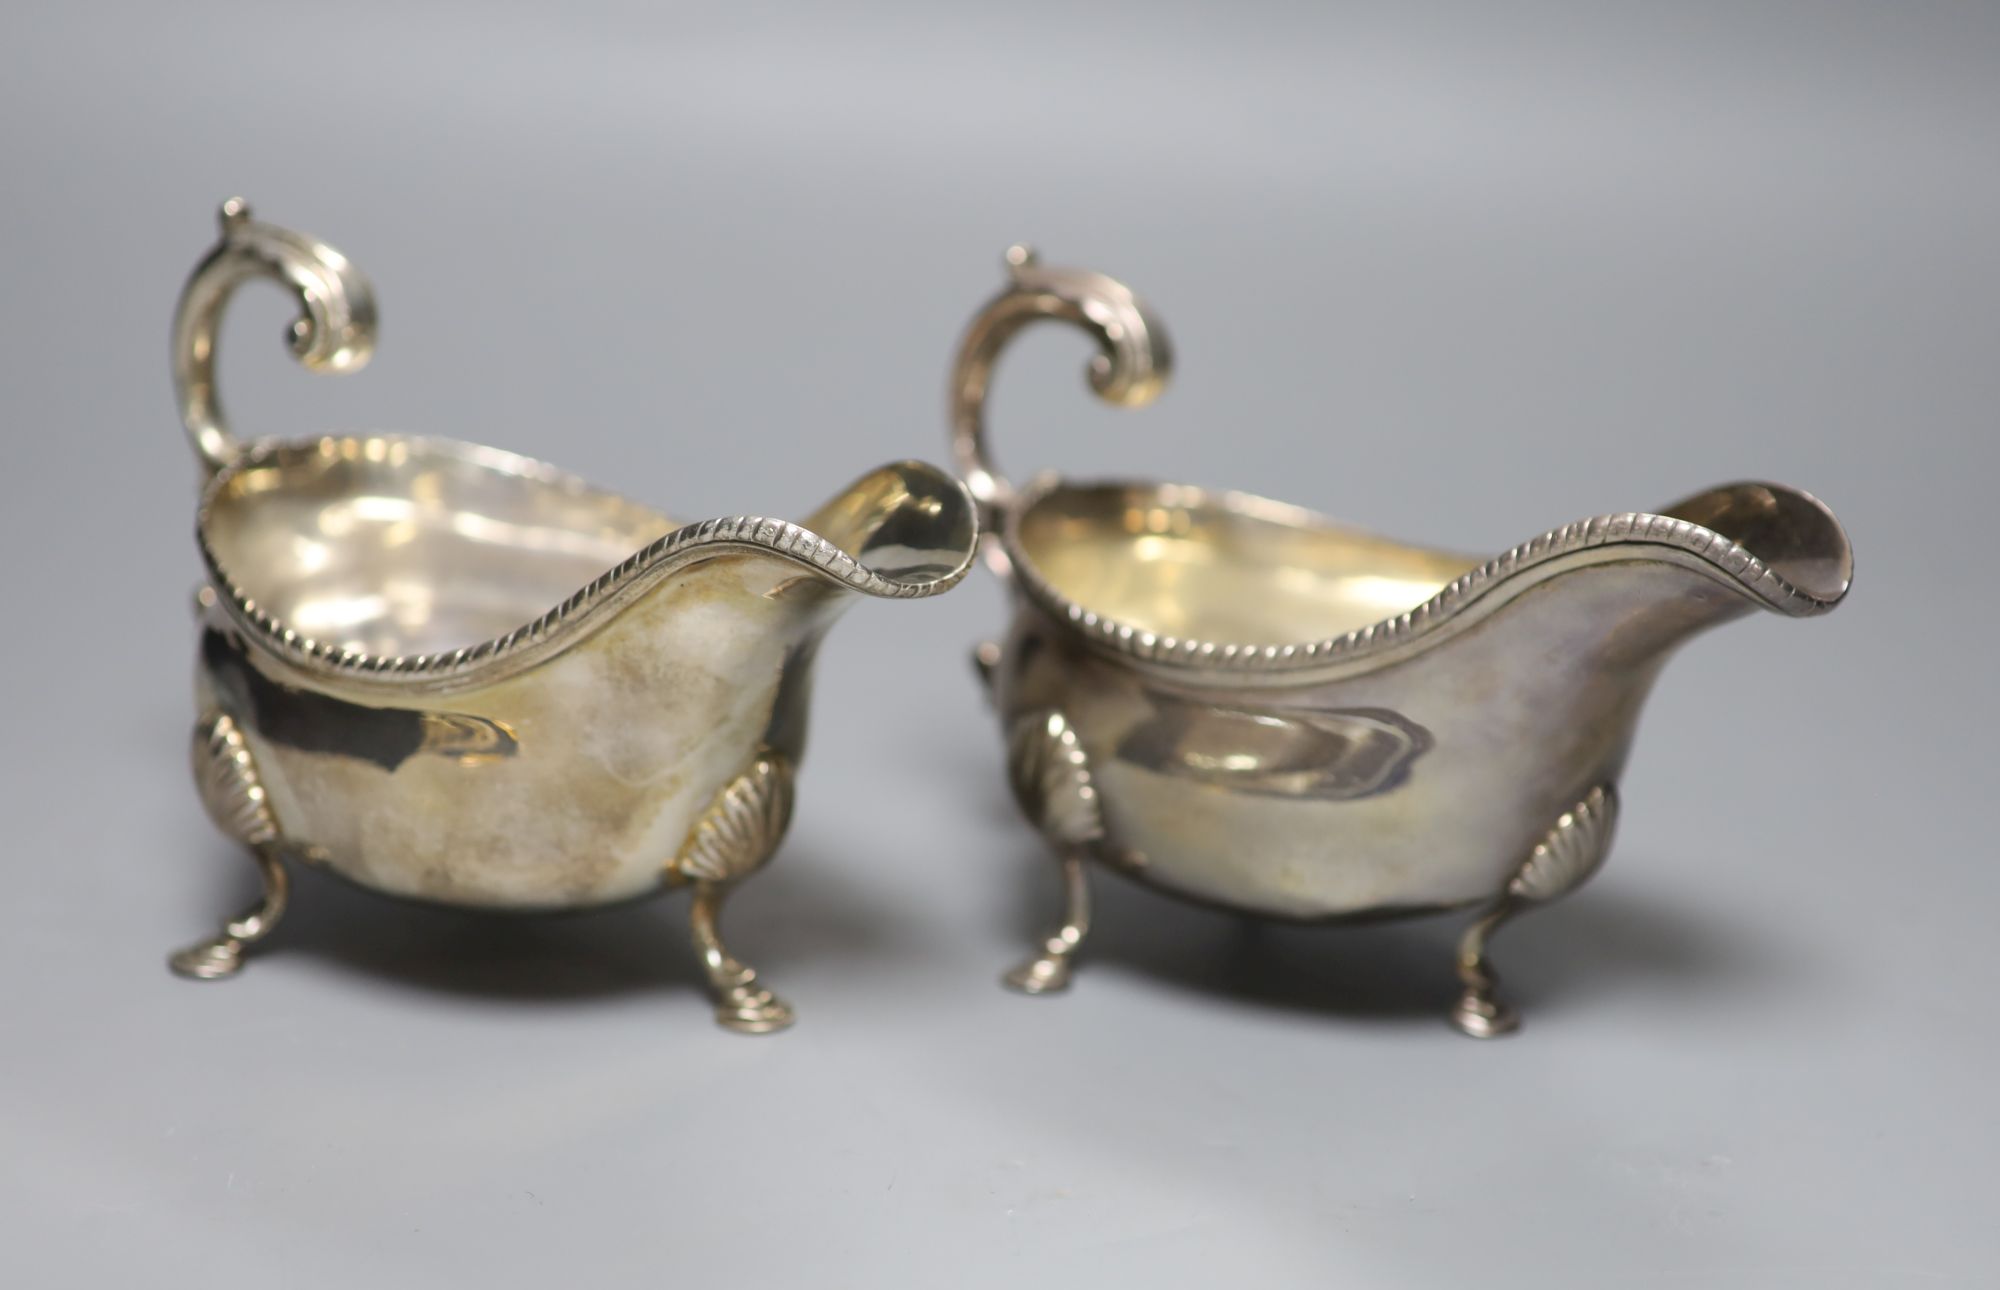 A pair of George III silver sauceboats, London, 1764?, marks rubbed, length 16.5cm, 15.5oz.